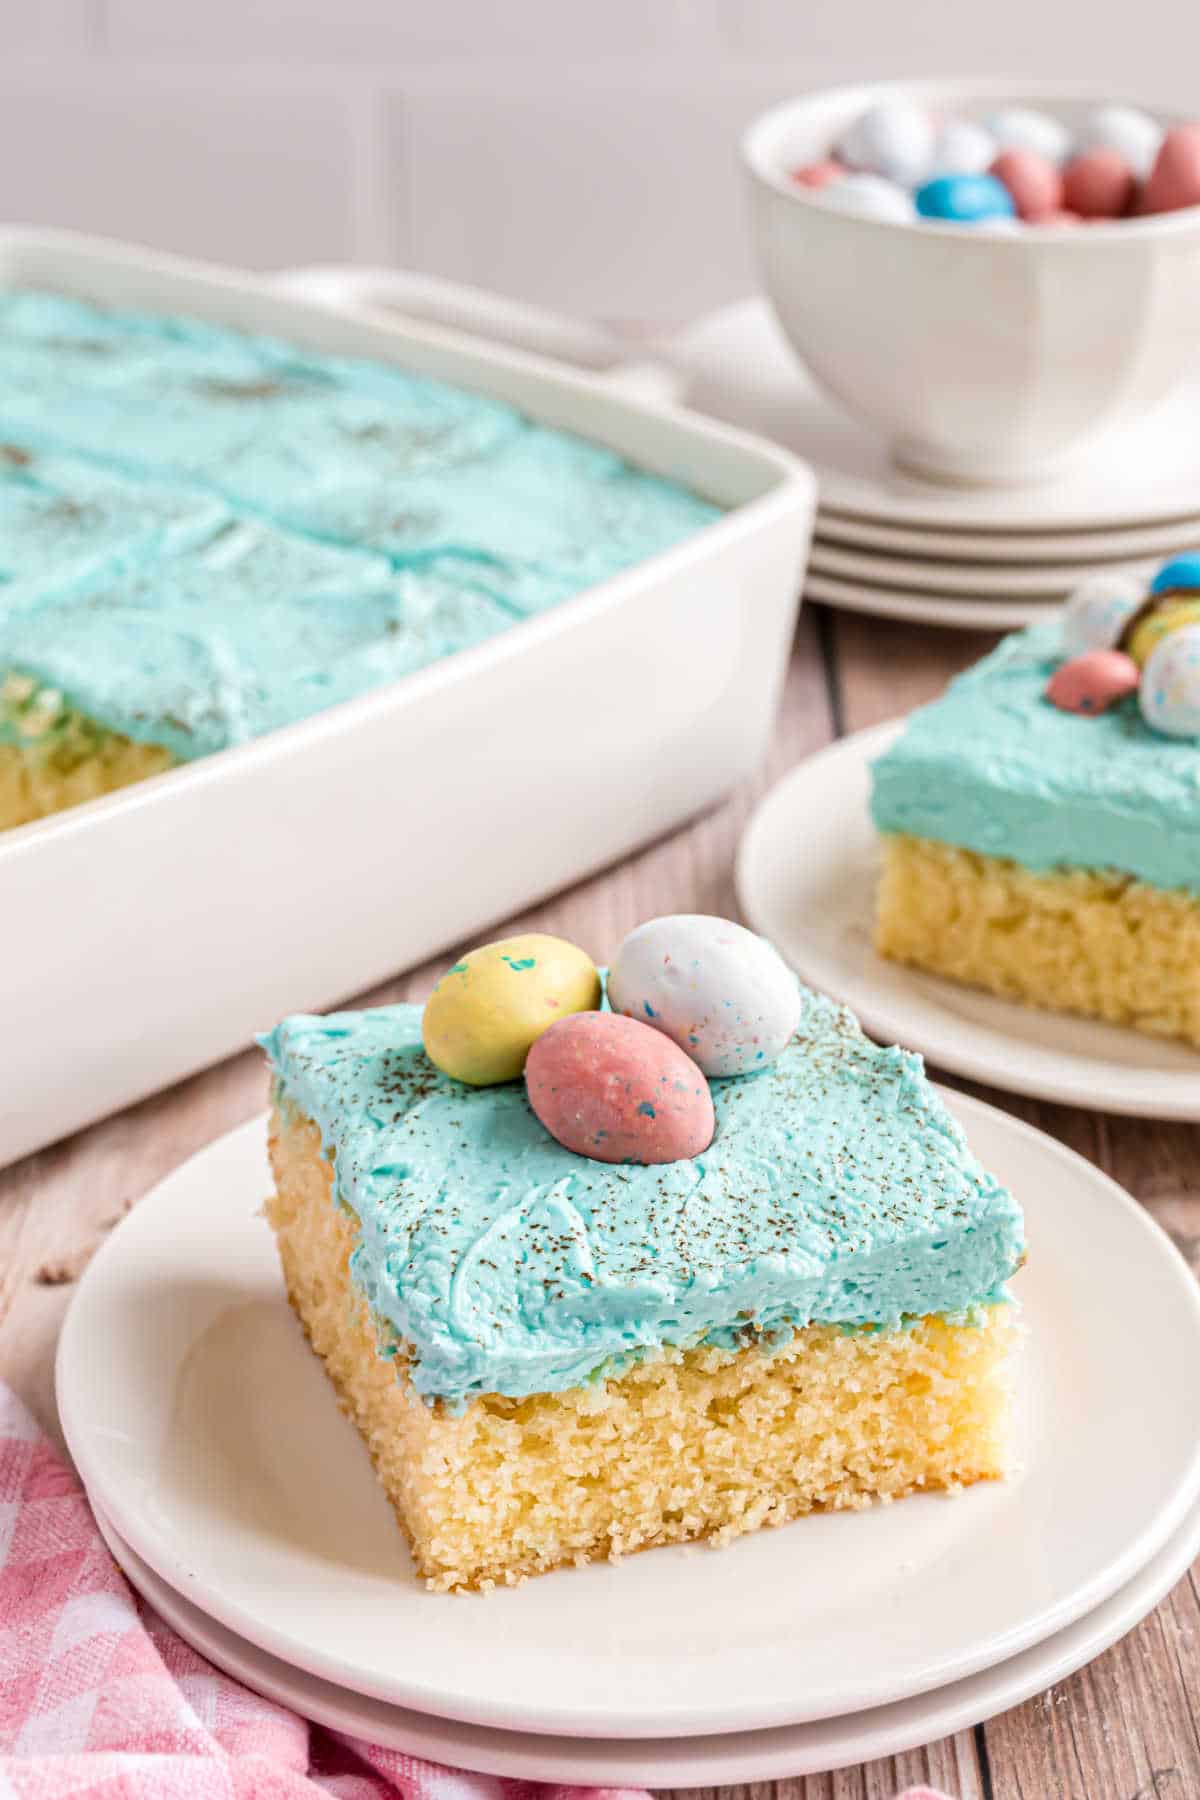 Slice of cake with light blue frosting and Robins eggs served on a stack of white plates.